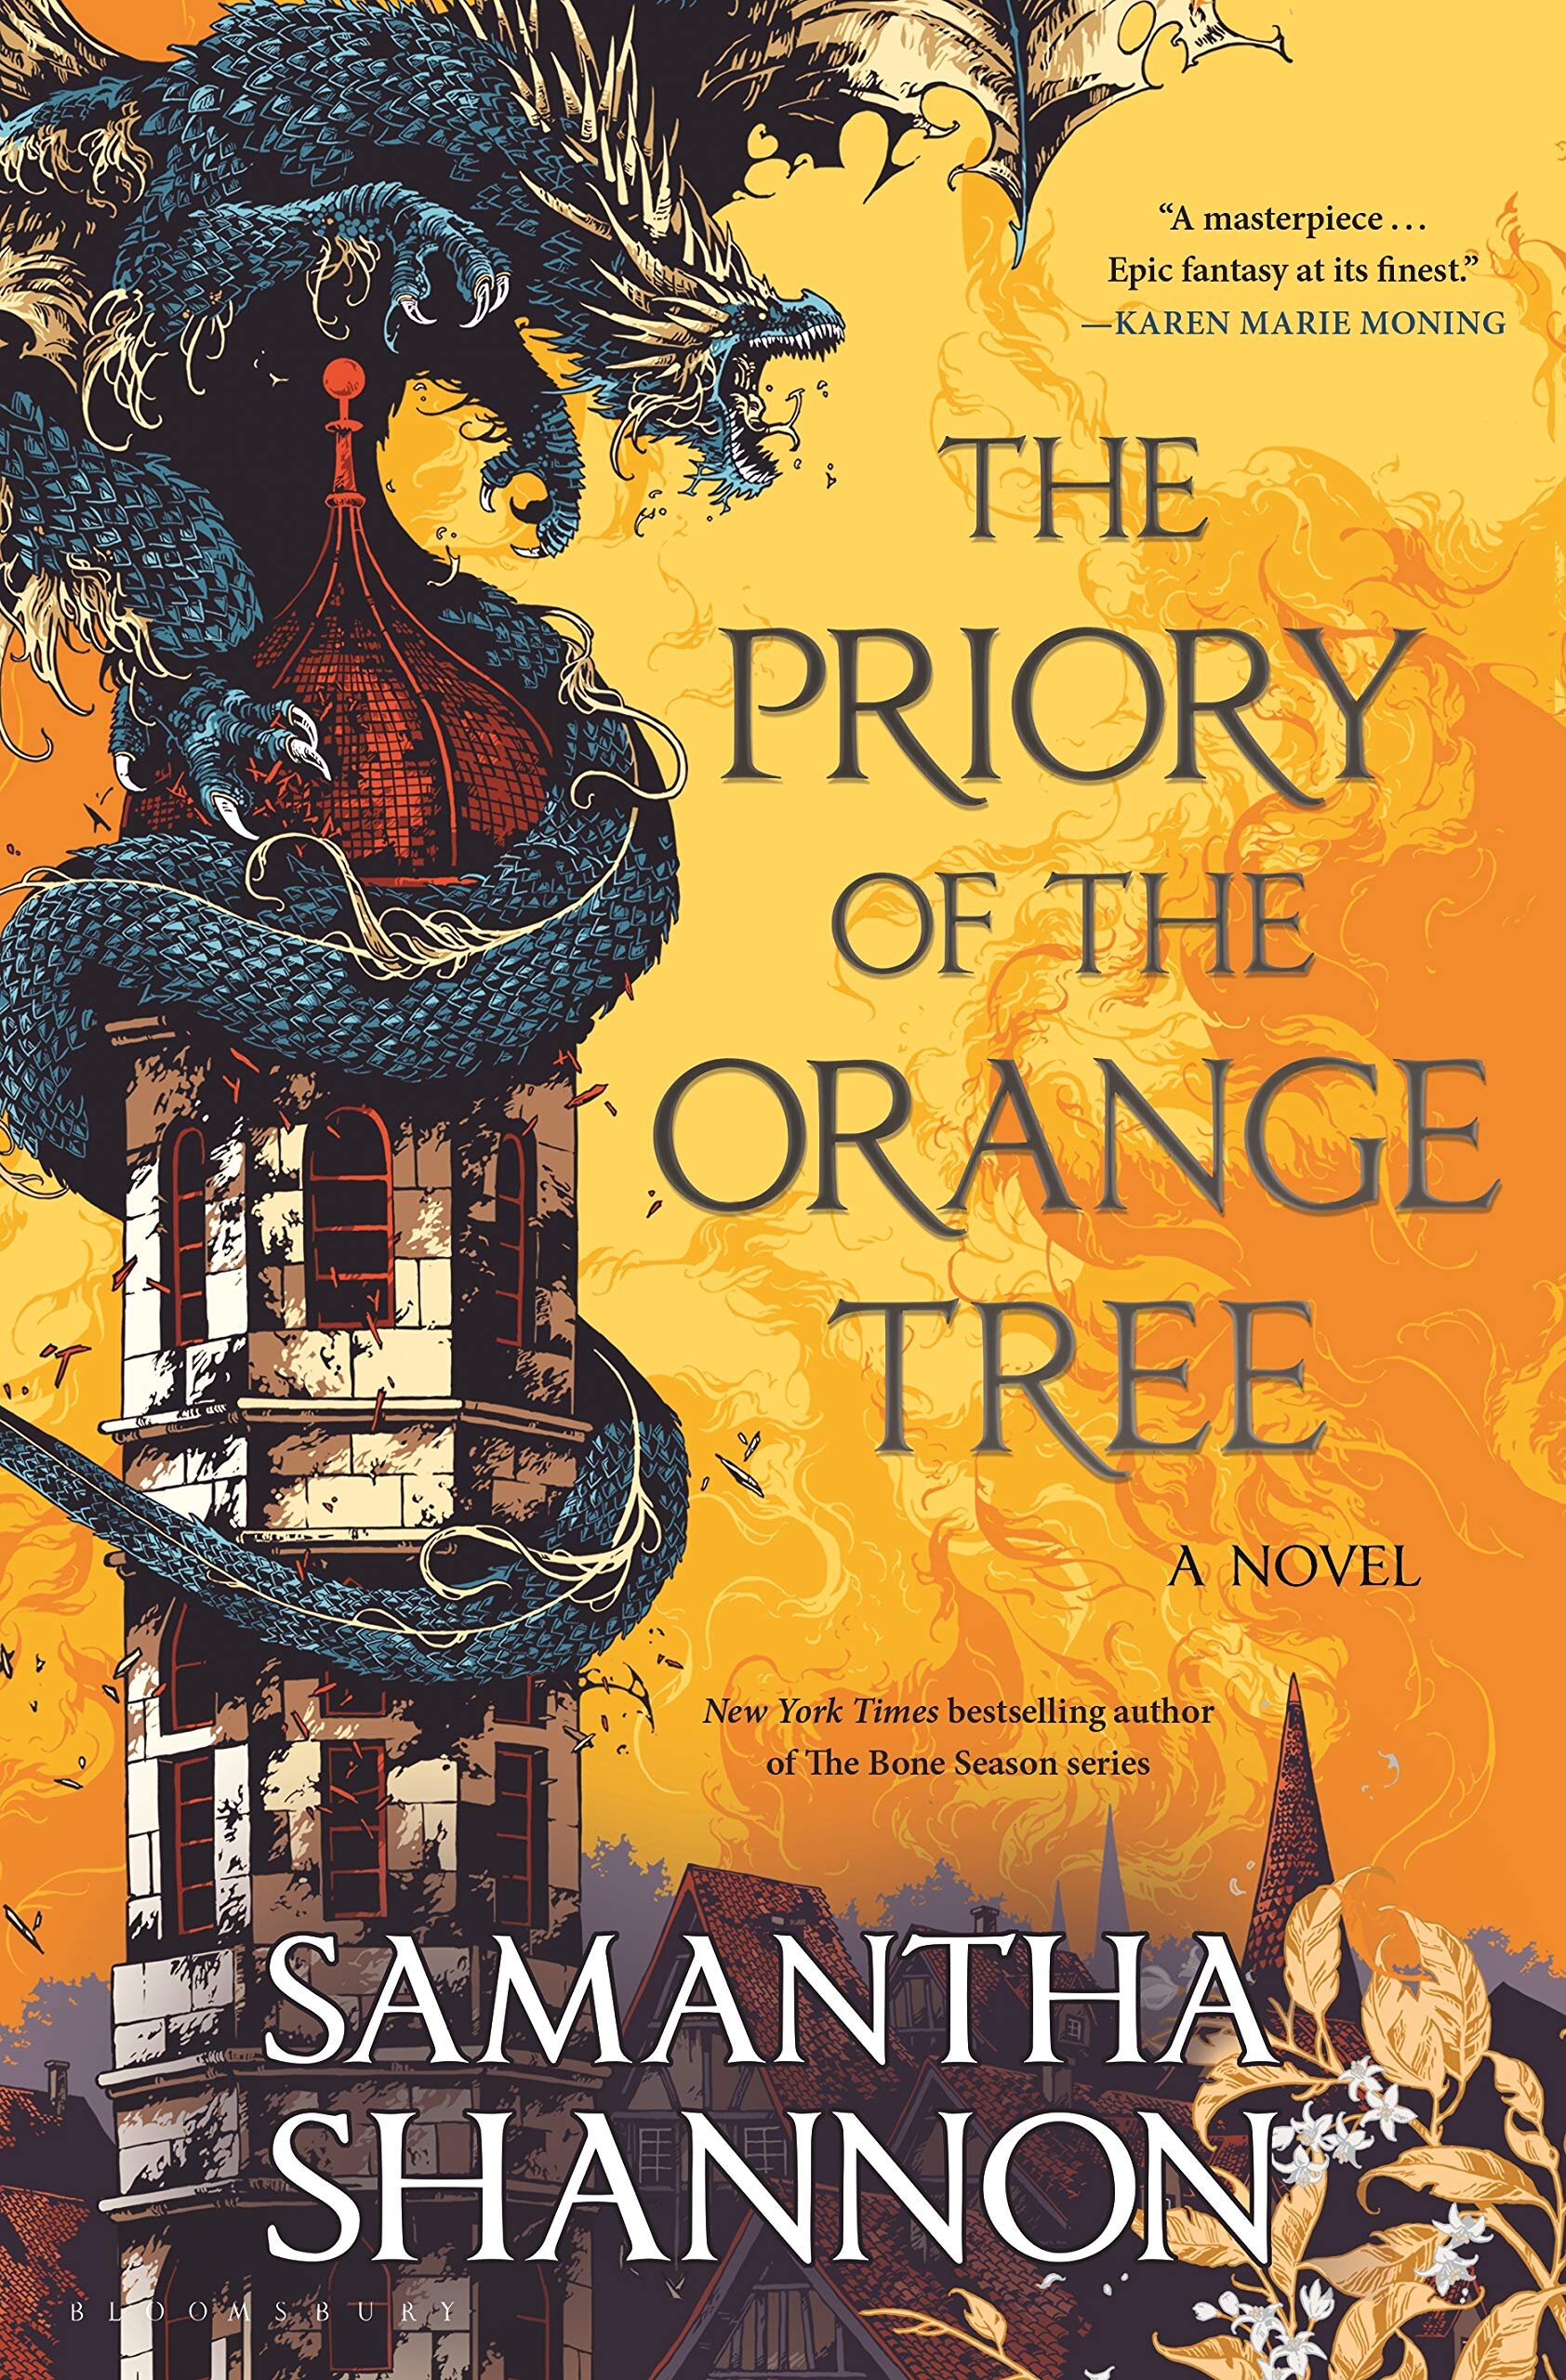 Science Fiction & Fantasy The Priory of the Orange Tree by Samantha Shannon.jpg